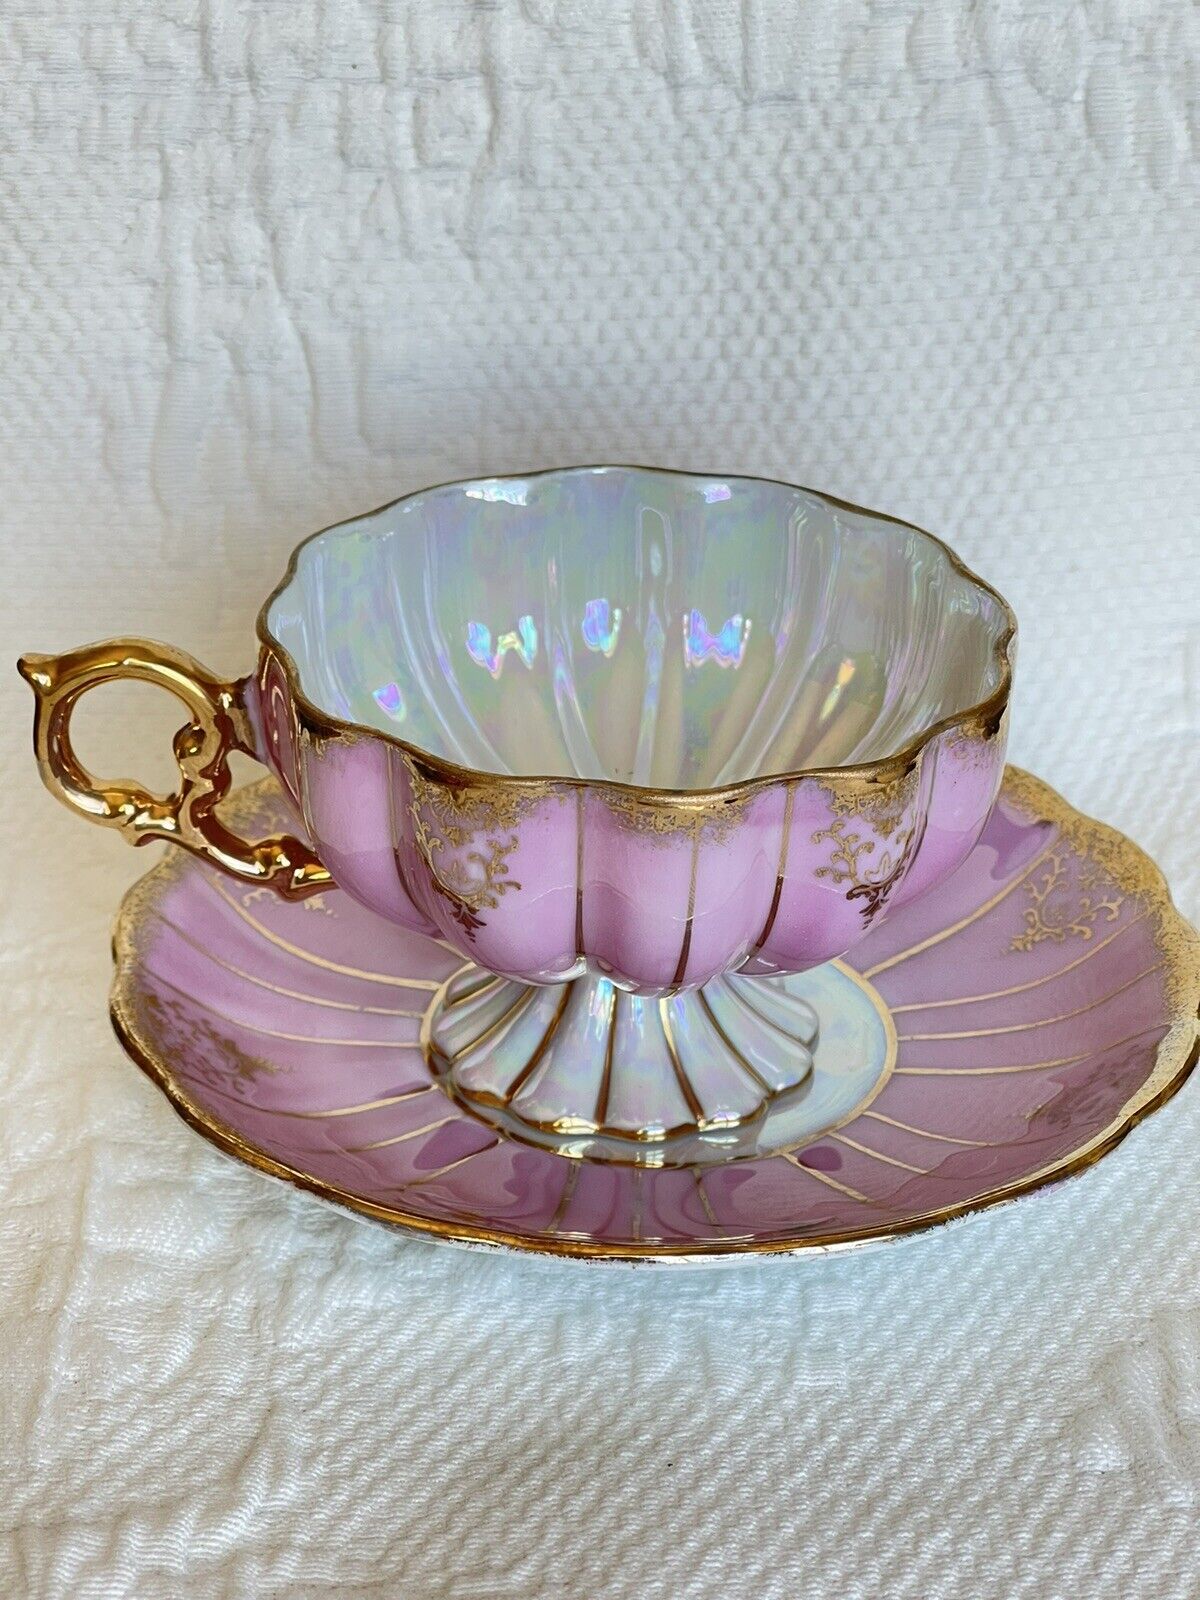 Vintage Royal Sealy China Gold Footed Pink Opalescent Tea Cup Saucer 1950s Japan